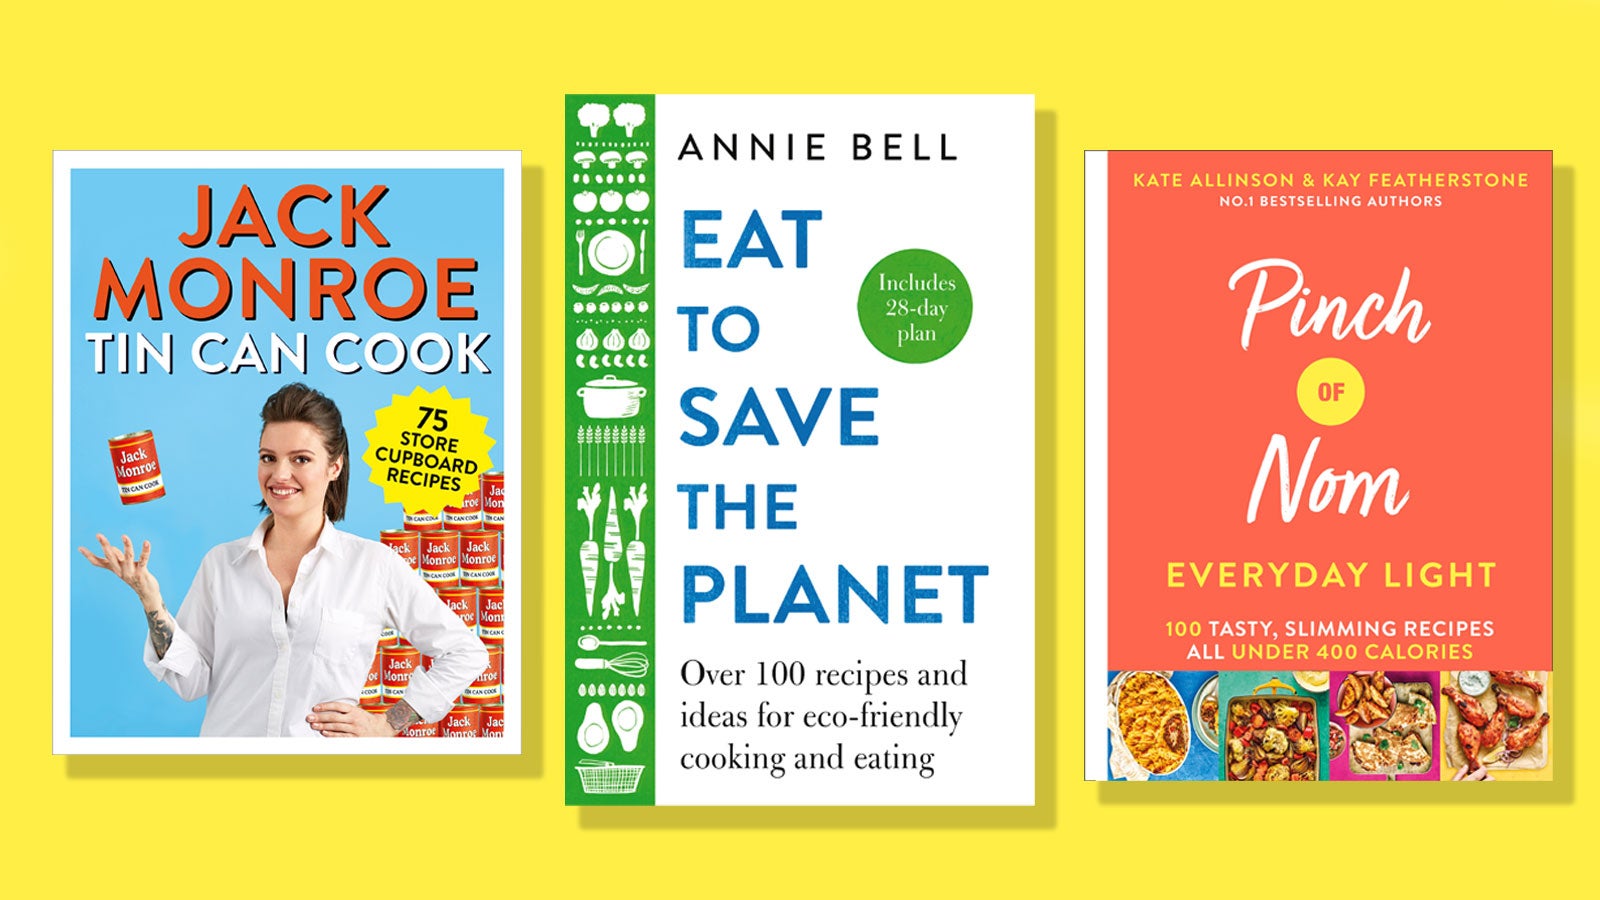 Tin Can Cook, Eat to Save the Planet and Pinch of Nom Everyday Light book covers